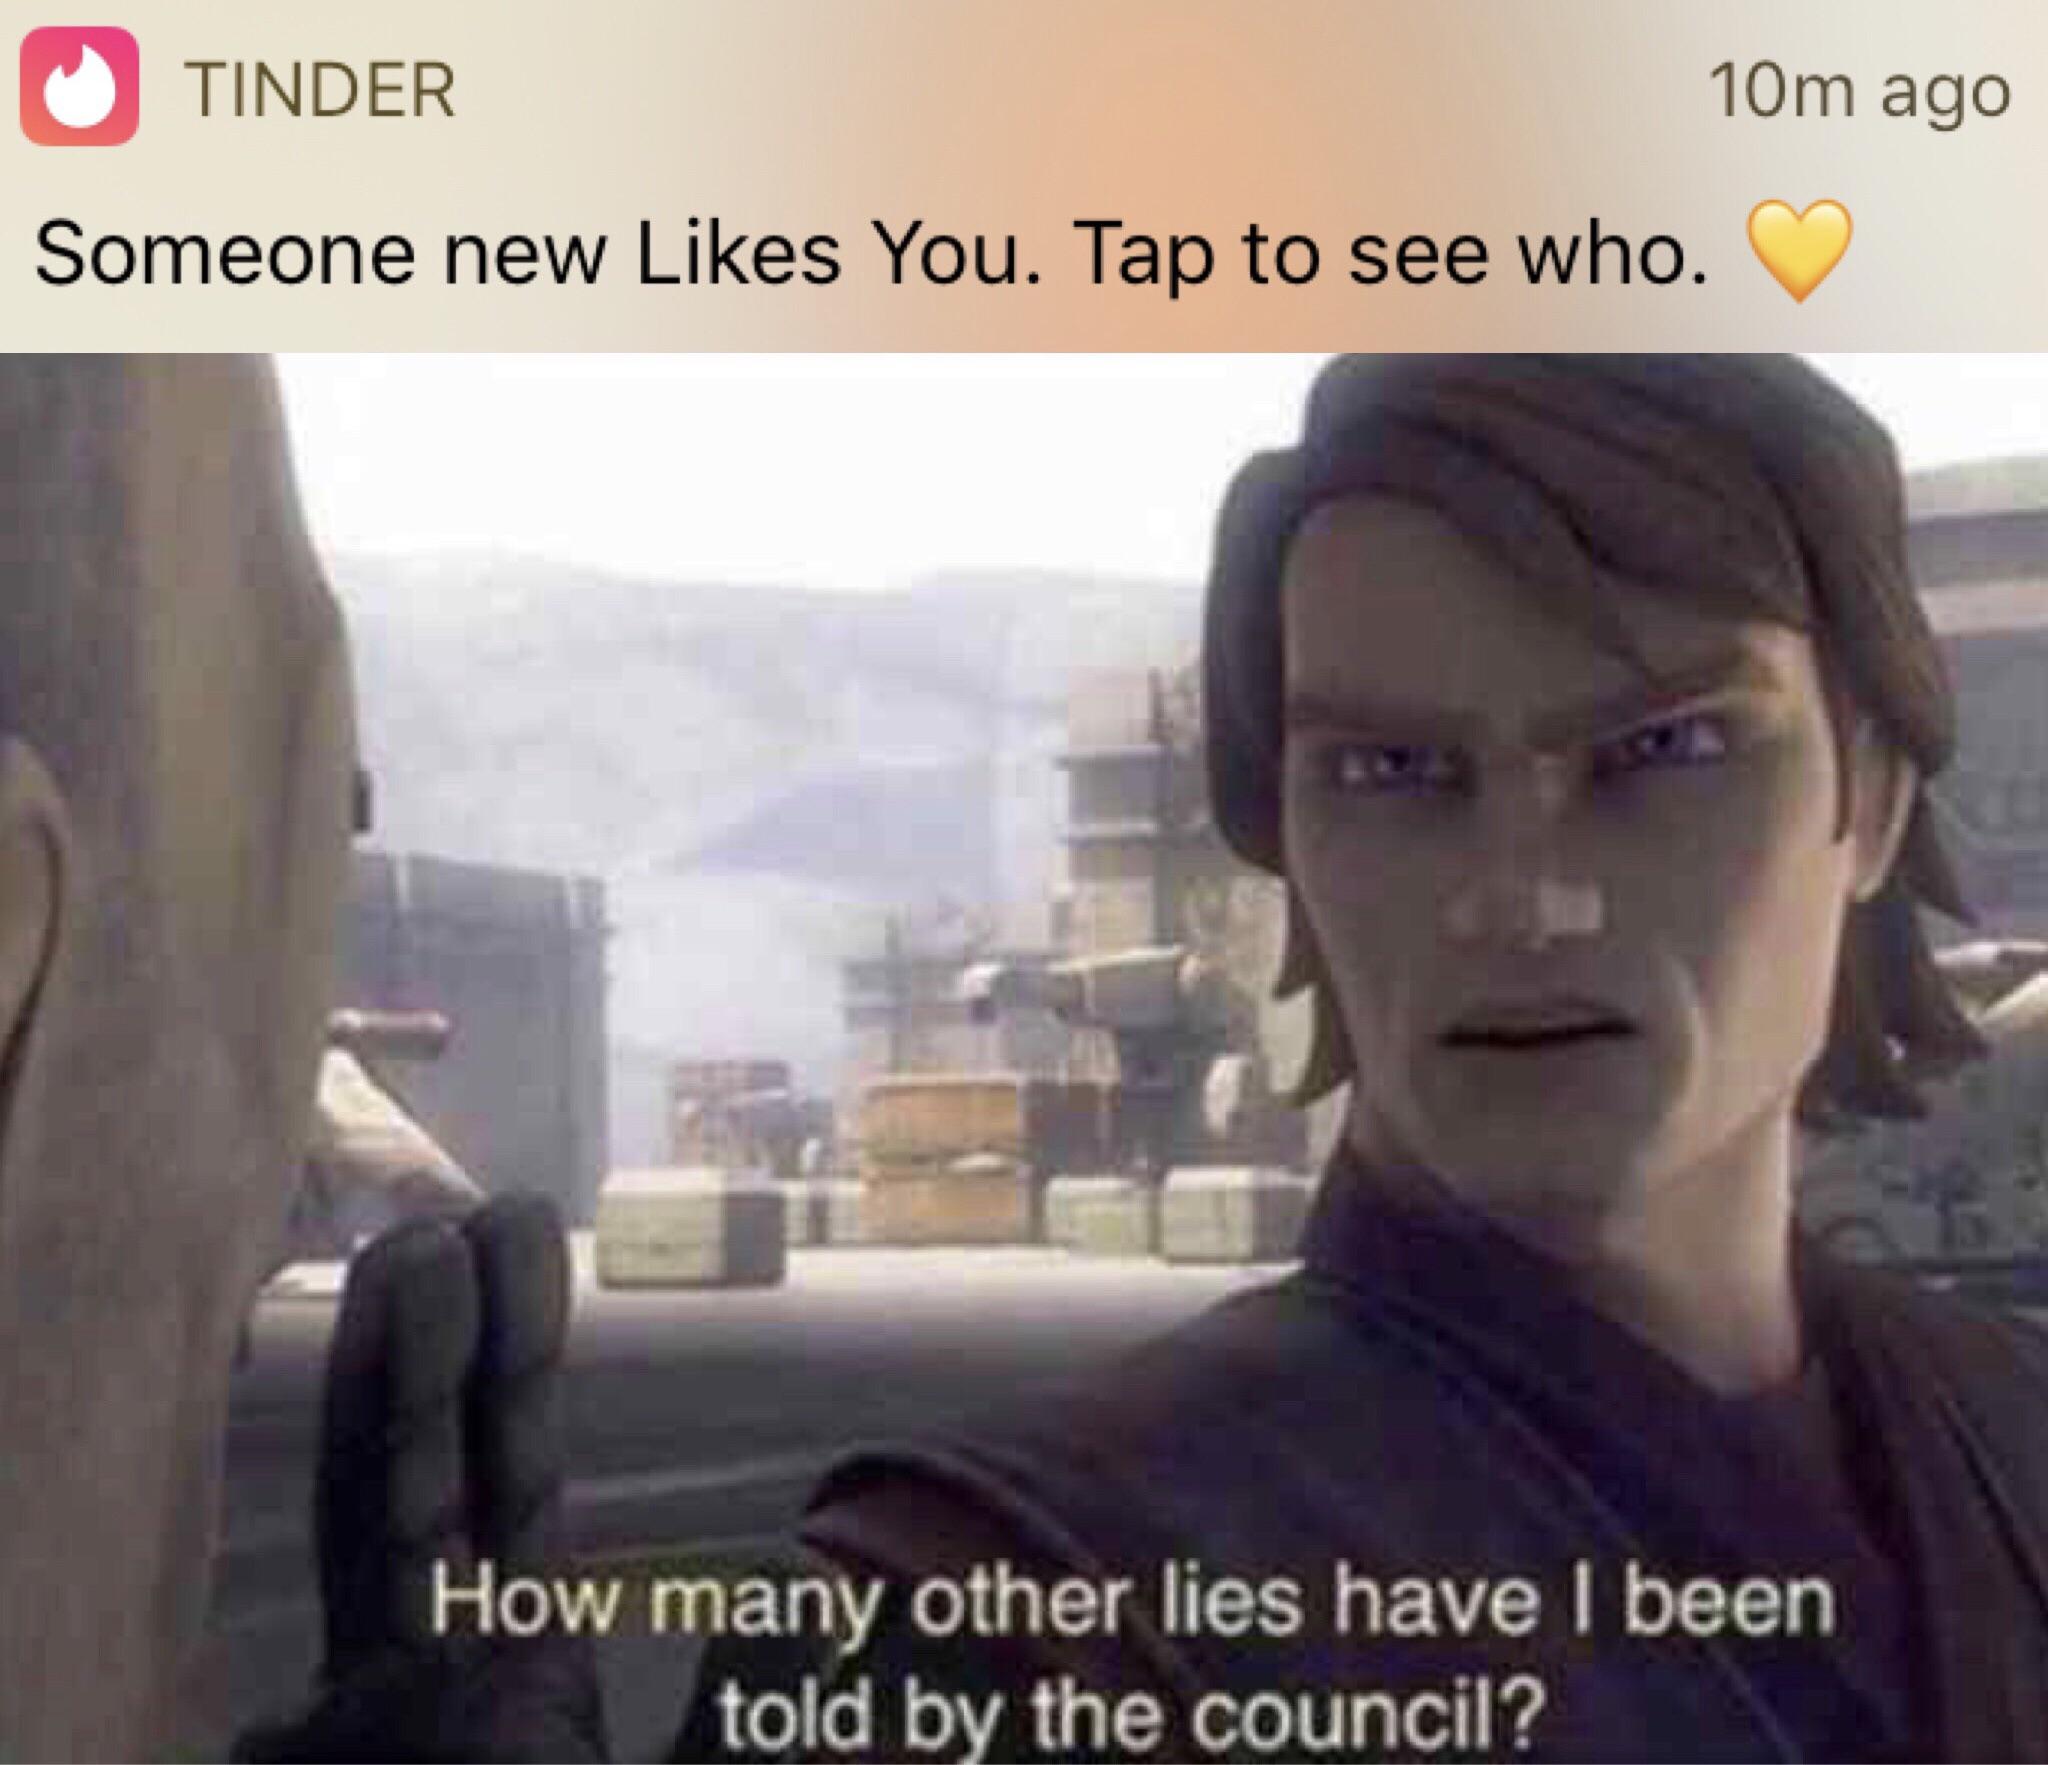 prequel-memes star-wars-memes prequel-memes text: TINDER 10m ago Someone new Likes You. Tap to see who. How many other lies have I been told by the council? 